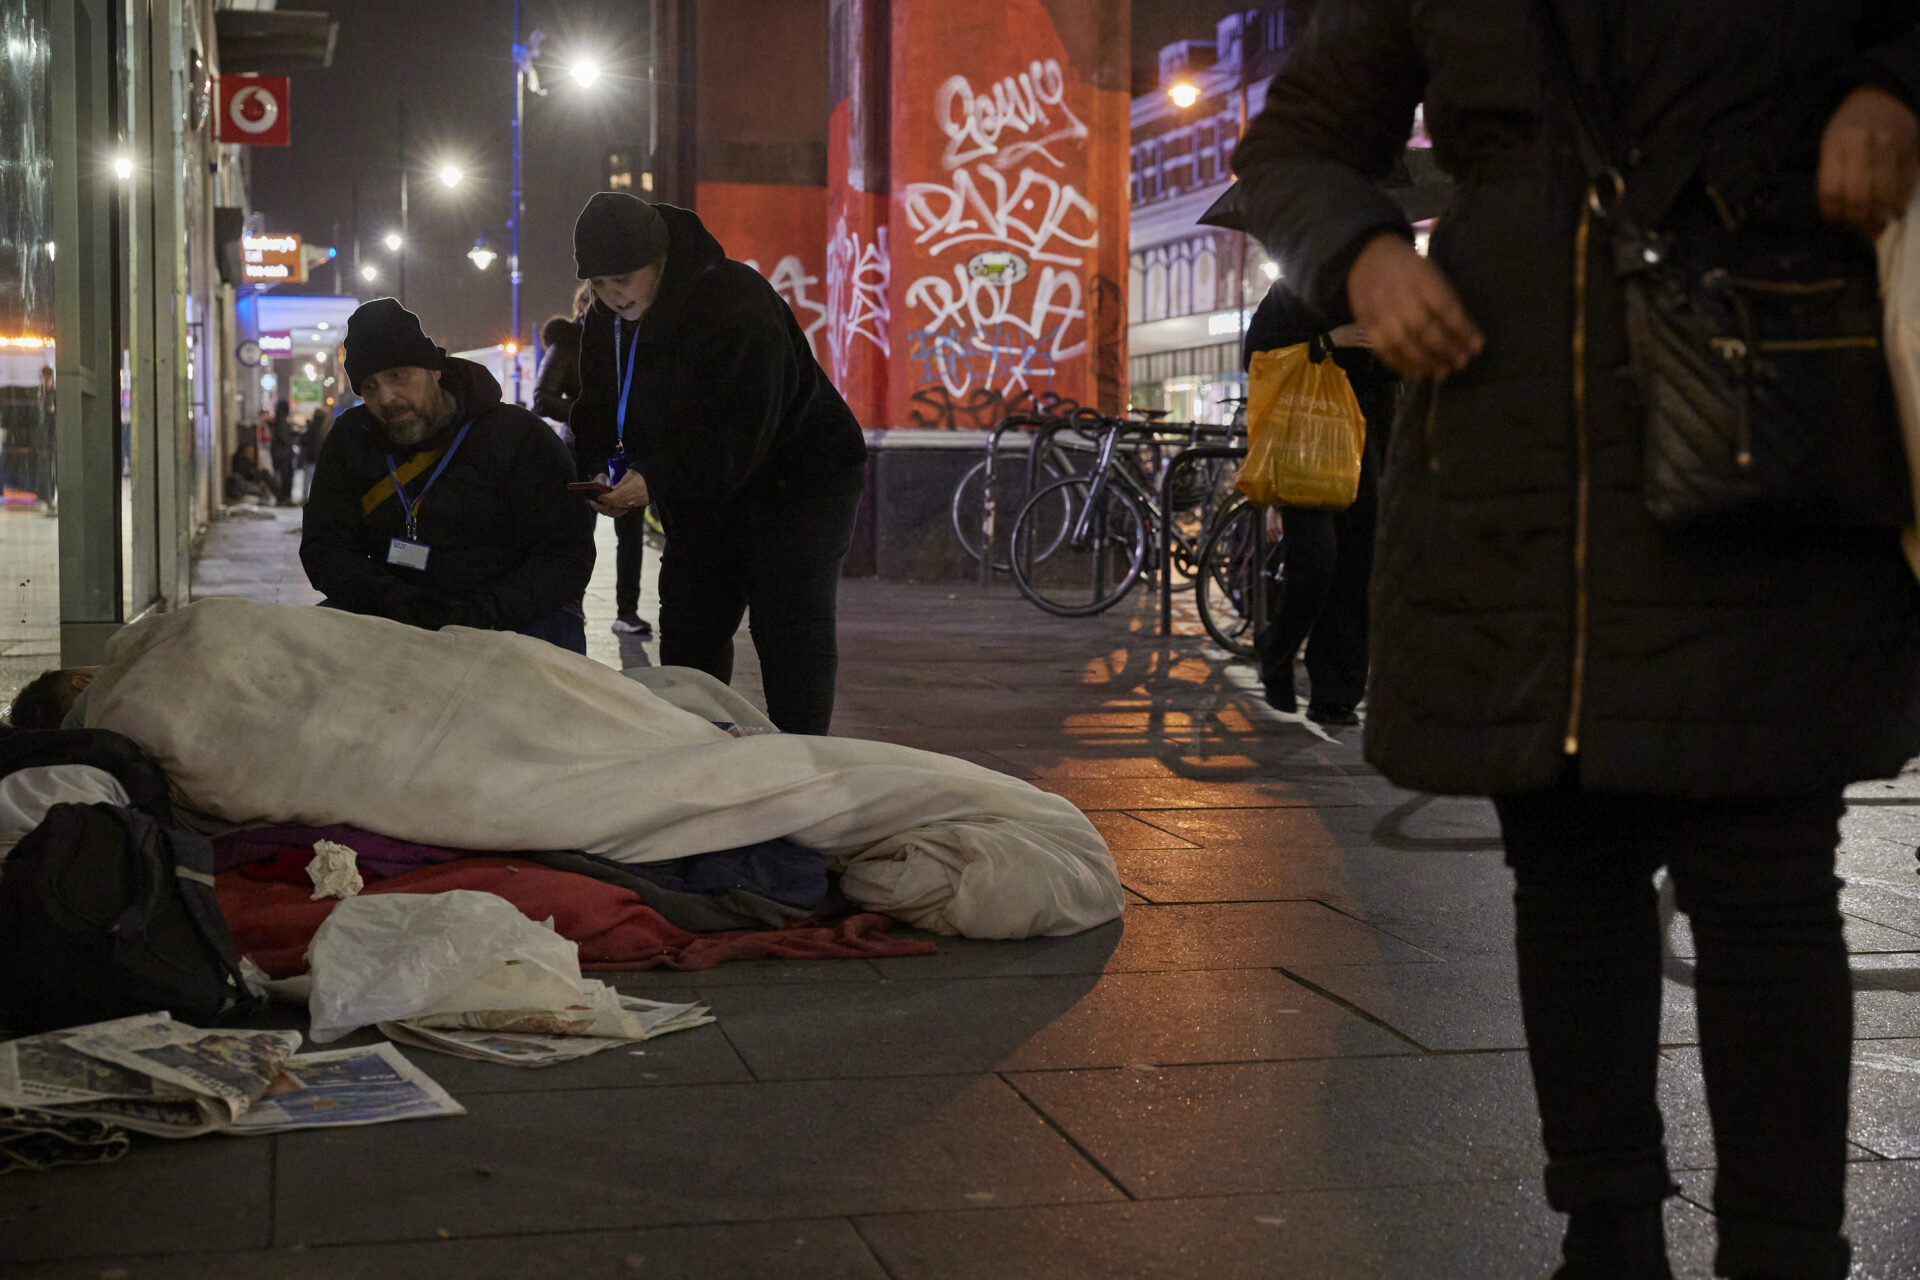 New figures show small decrease in people sleeping rough in London